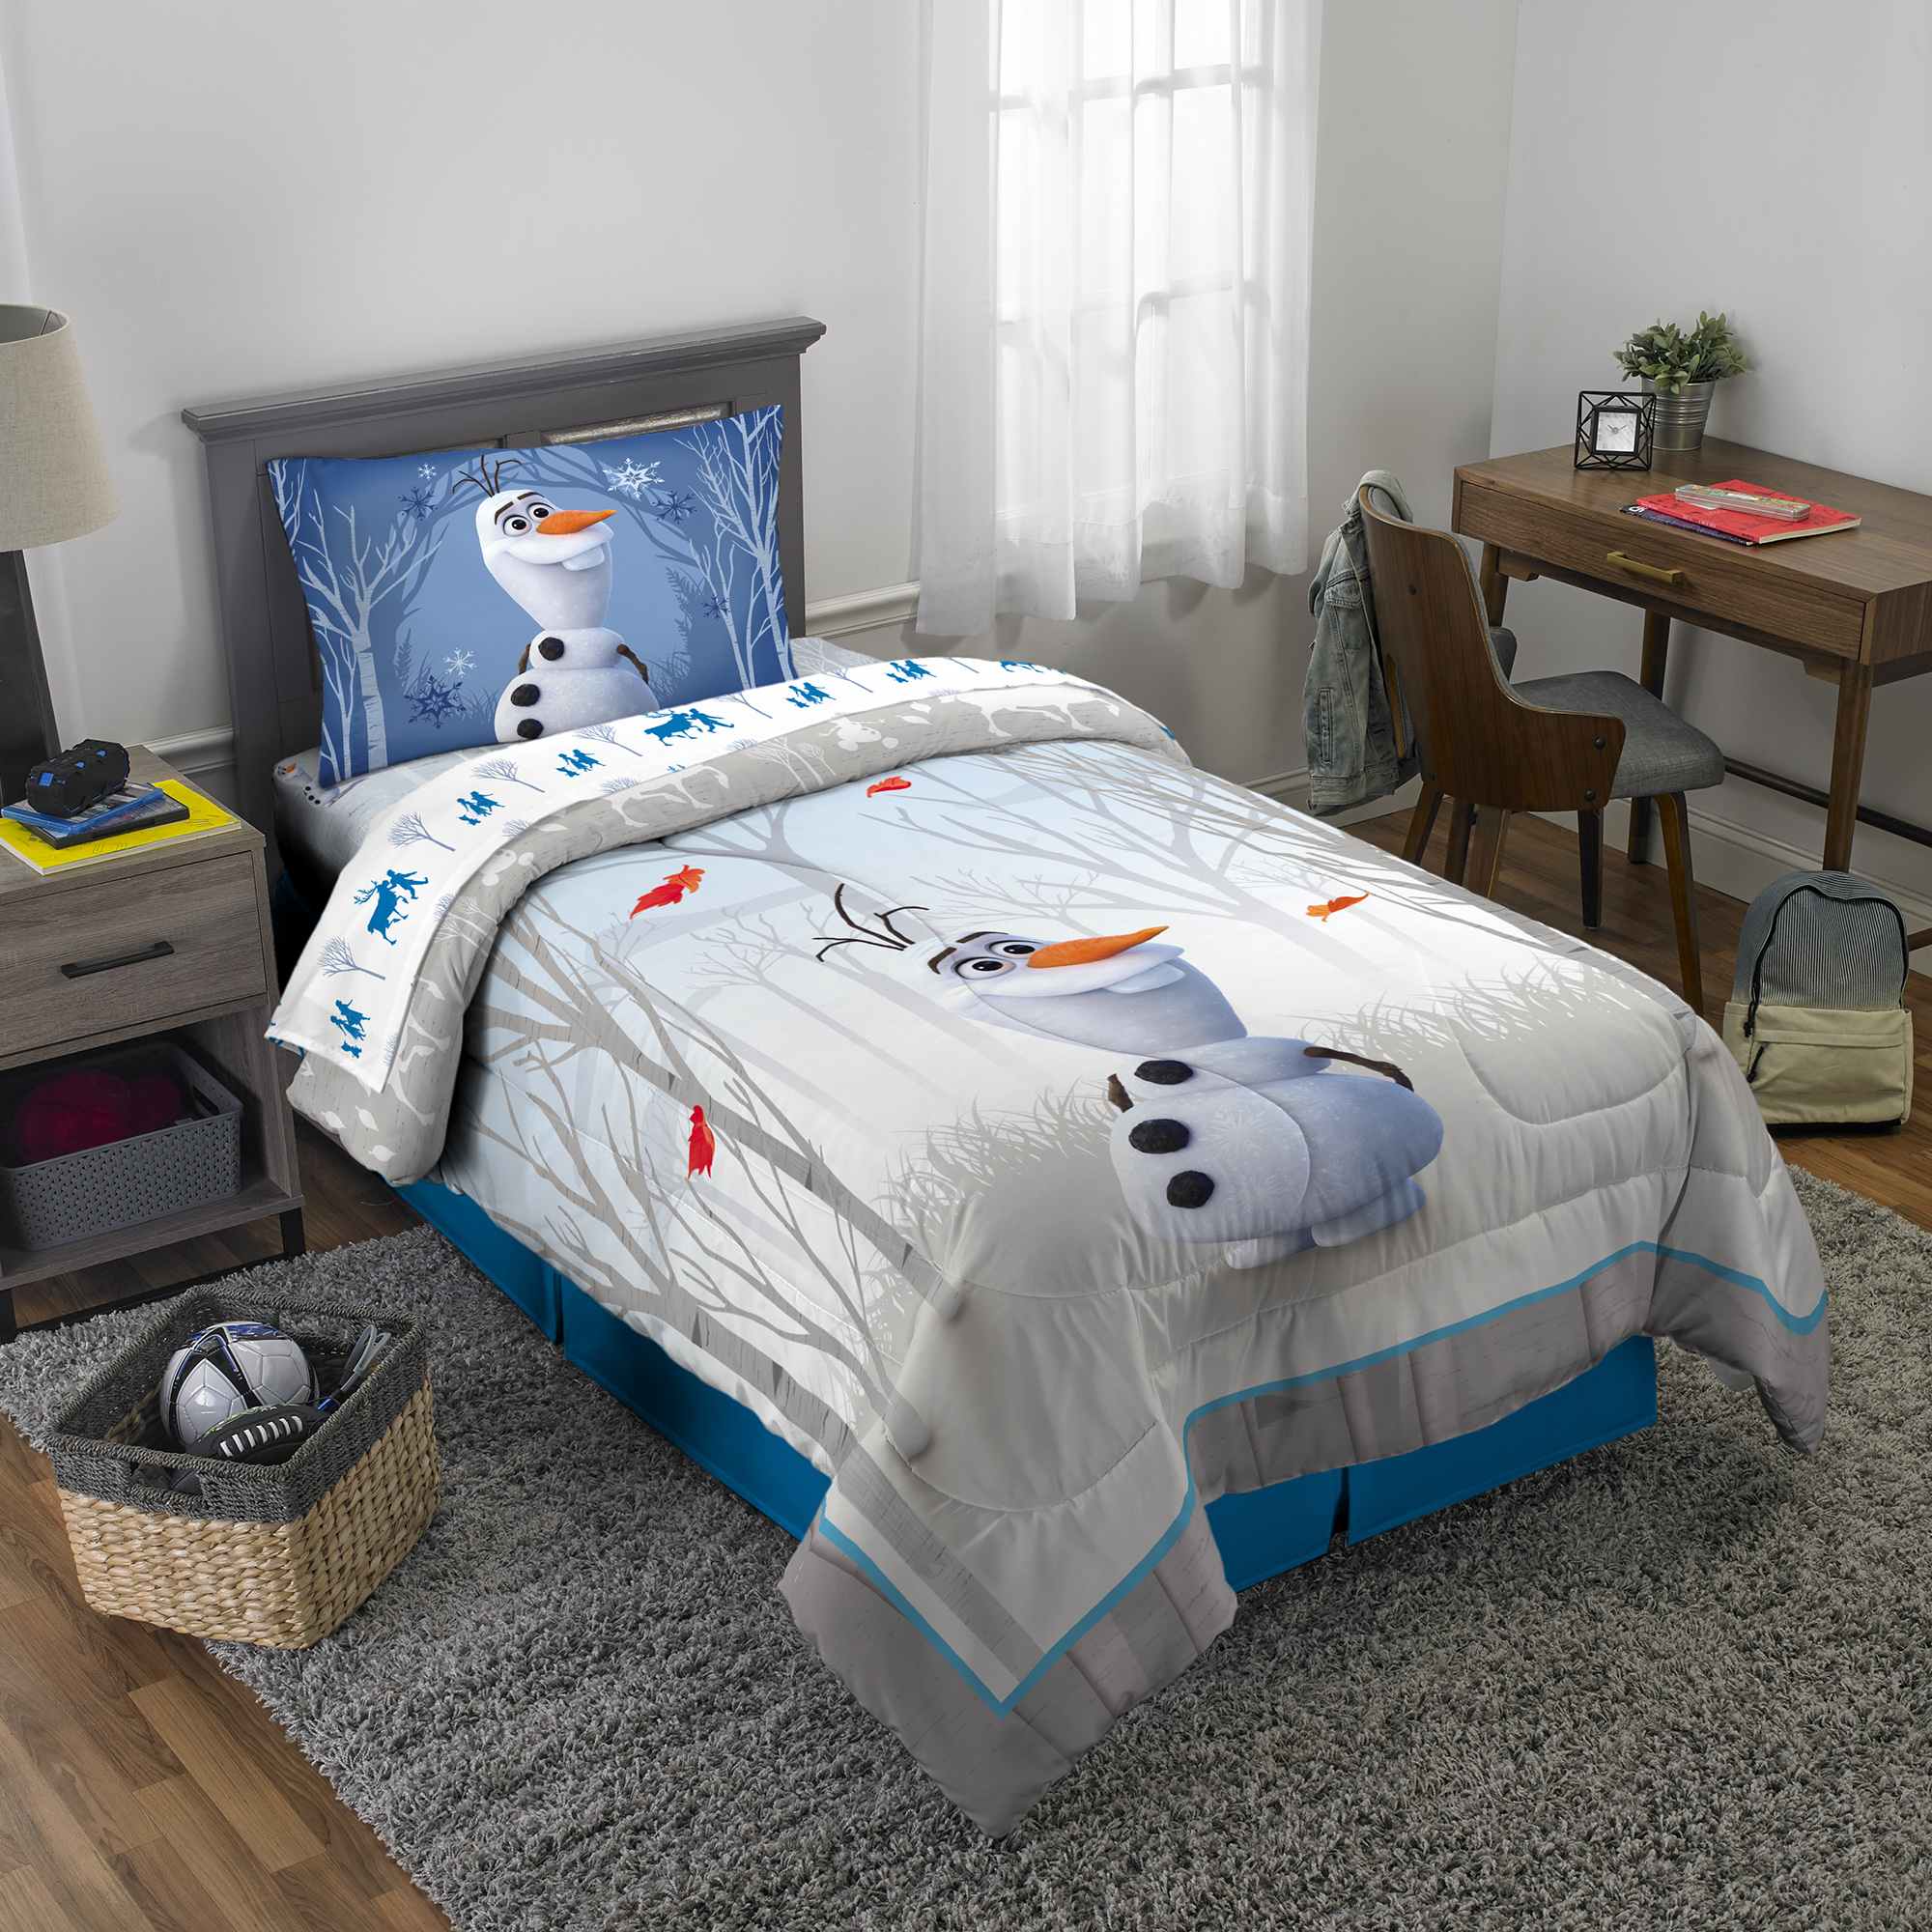 Disney Frozen Olaf Kids Comforter and Sham, 2-Piece Set, Twin/Full, Reversible, Gray - image 3 of 15